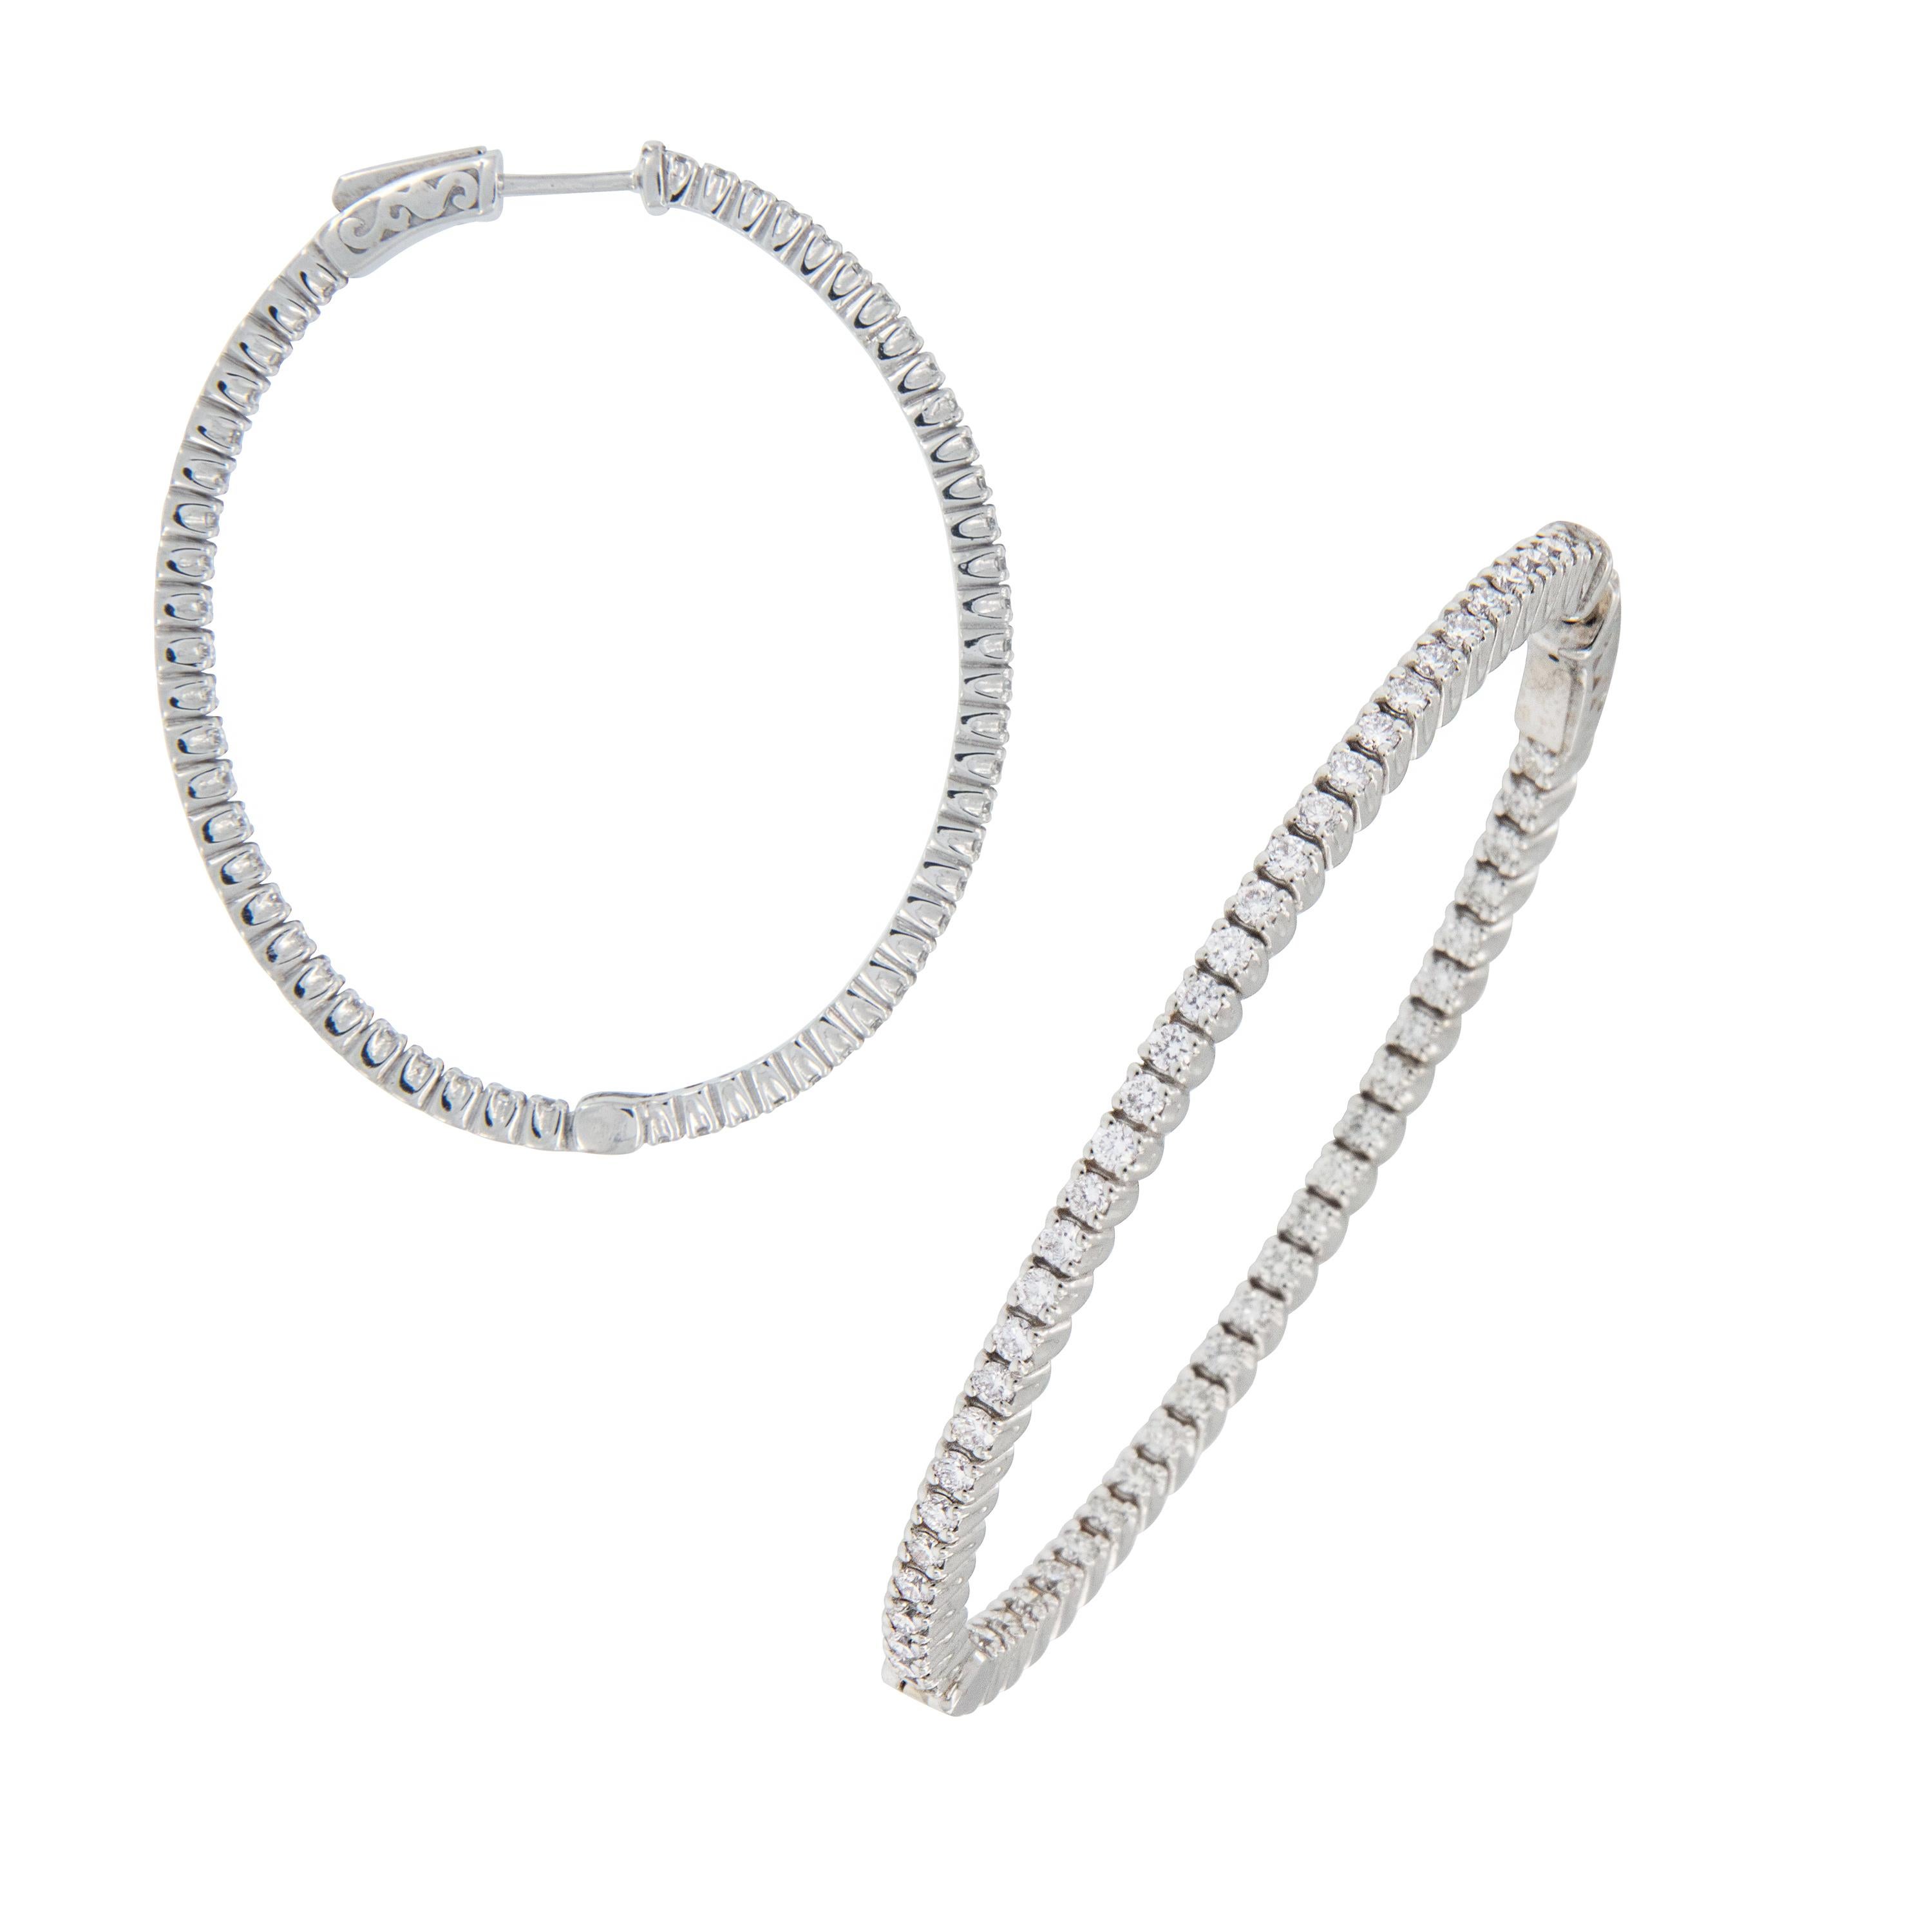 Why be like everyone else when you can stand out with these gorgeous Grande' earrings? 18 karat white gold inside / outside diamond hoops with 2.07 Cttw VS, F-G diamonds are the perfect accessory to any outfit! Earrings have posts & hinged backs for